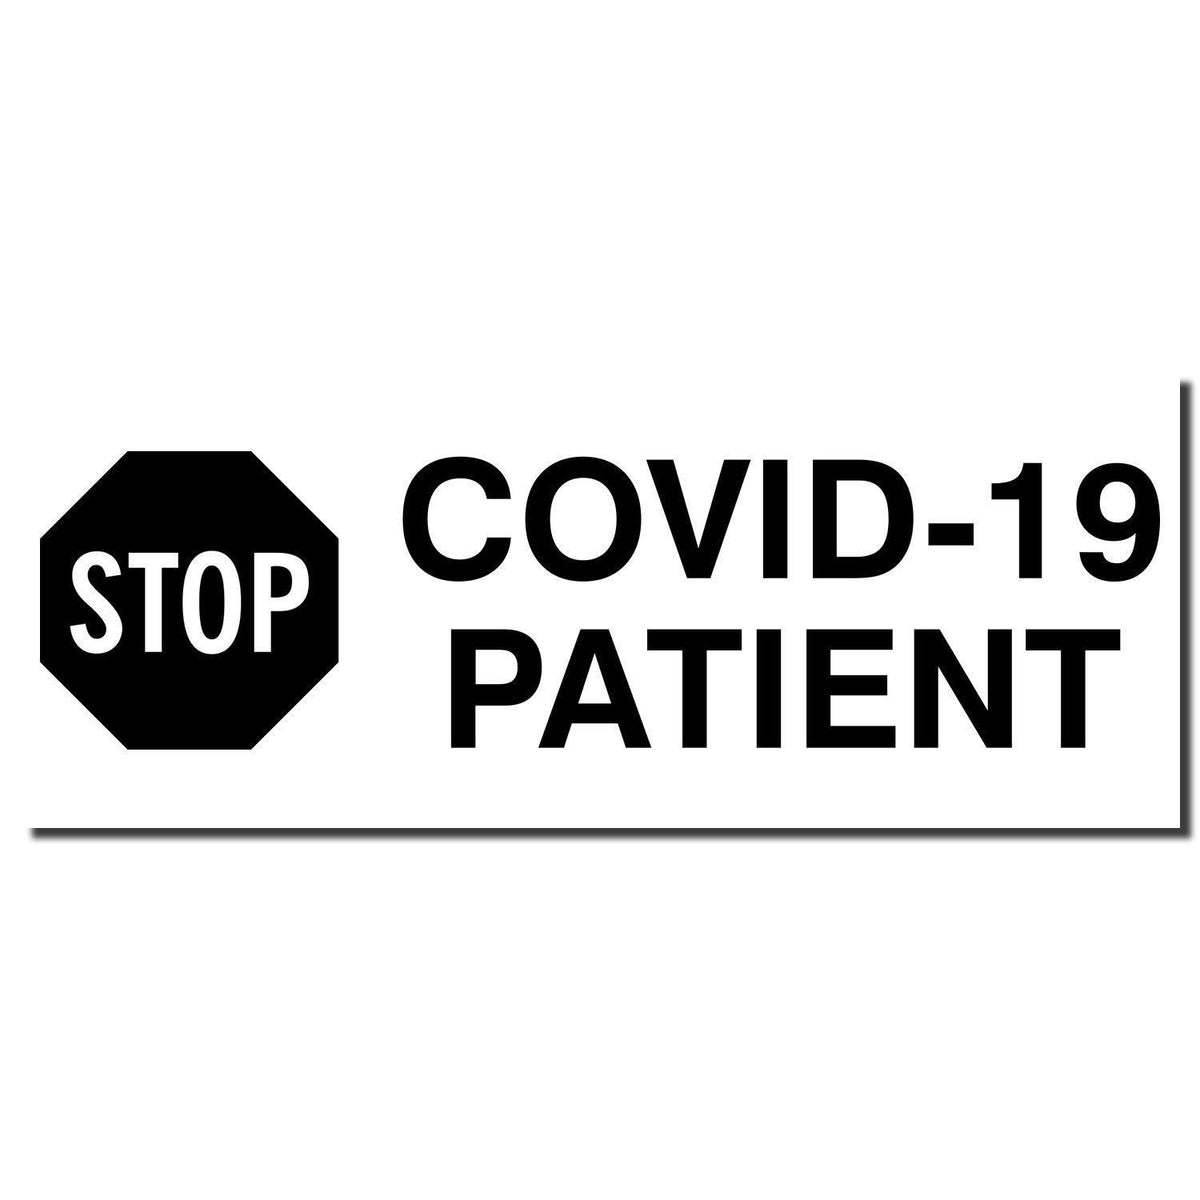 Large Stop Covid Patient Rubber Stamp - Engineer Seal Stamps - Brand_Acorn, Impression Size_Large, Stamp Type_Regular Stamp, Type of Use_Medical Office